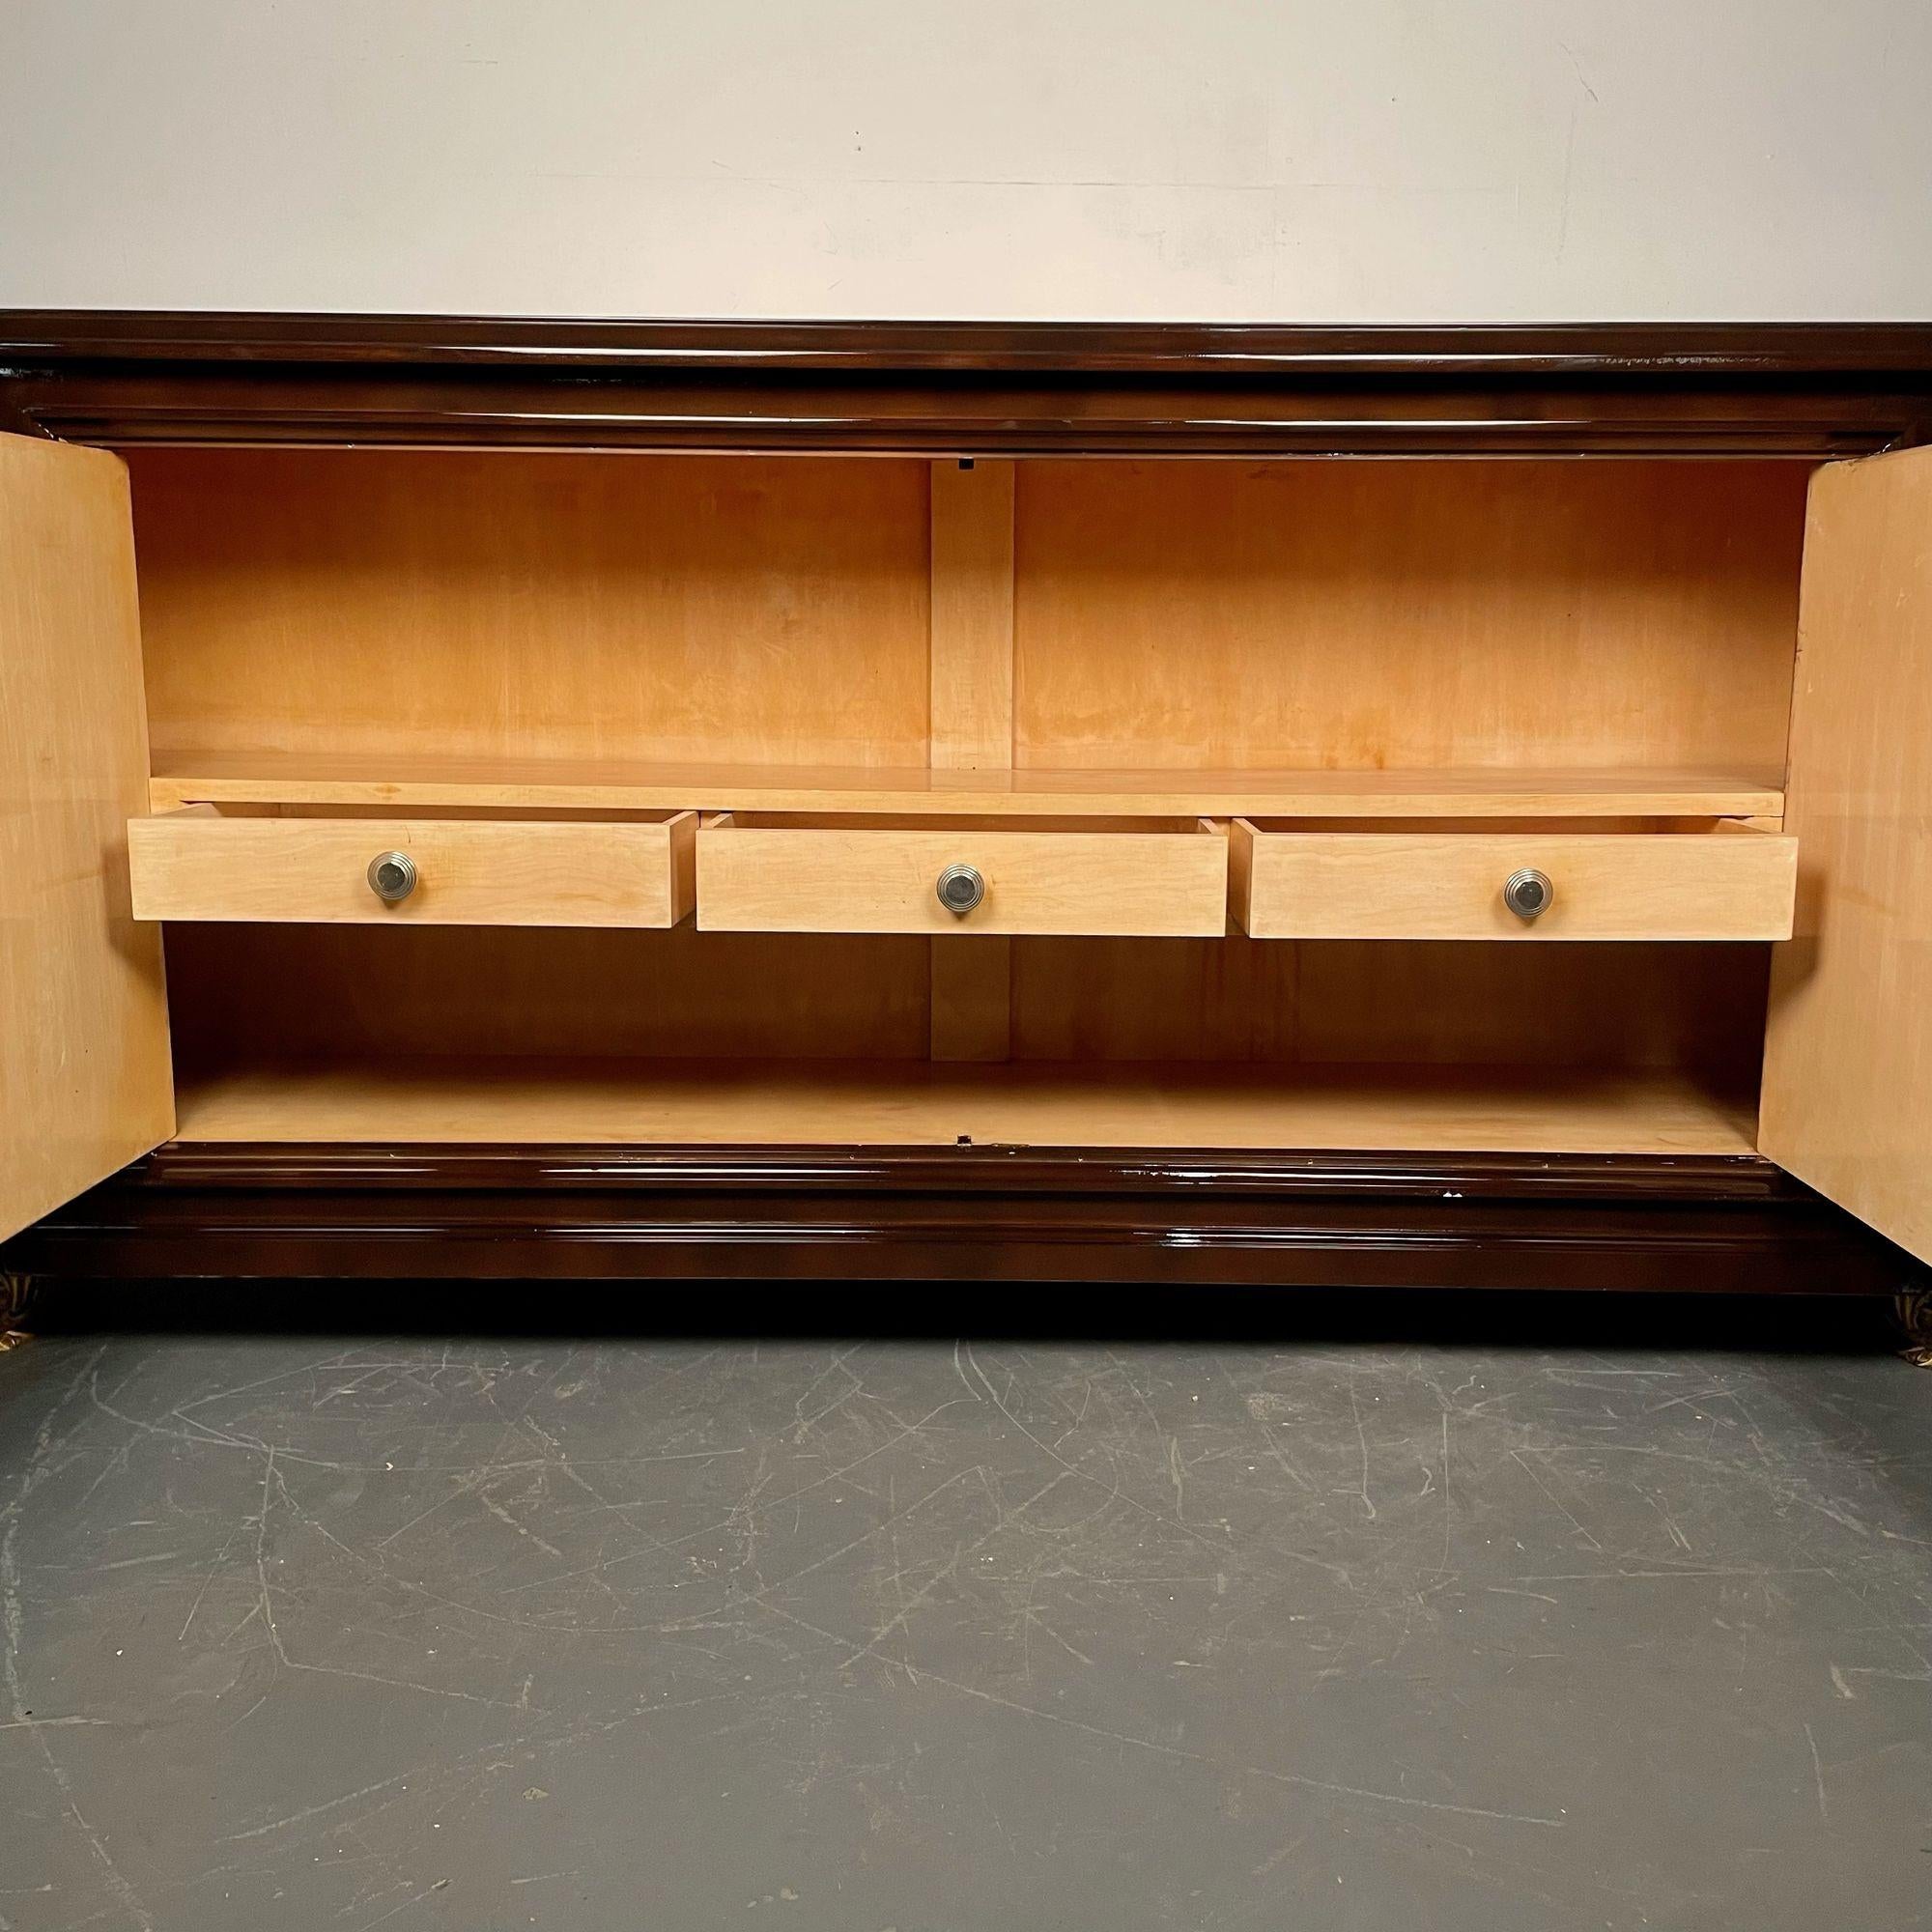 Rene Drouet, French Art Deco, Sideboard, Brown Lacquer, Gilt, France, 1940s For Sale 2